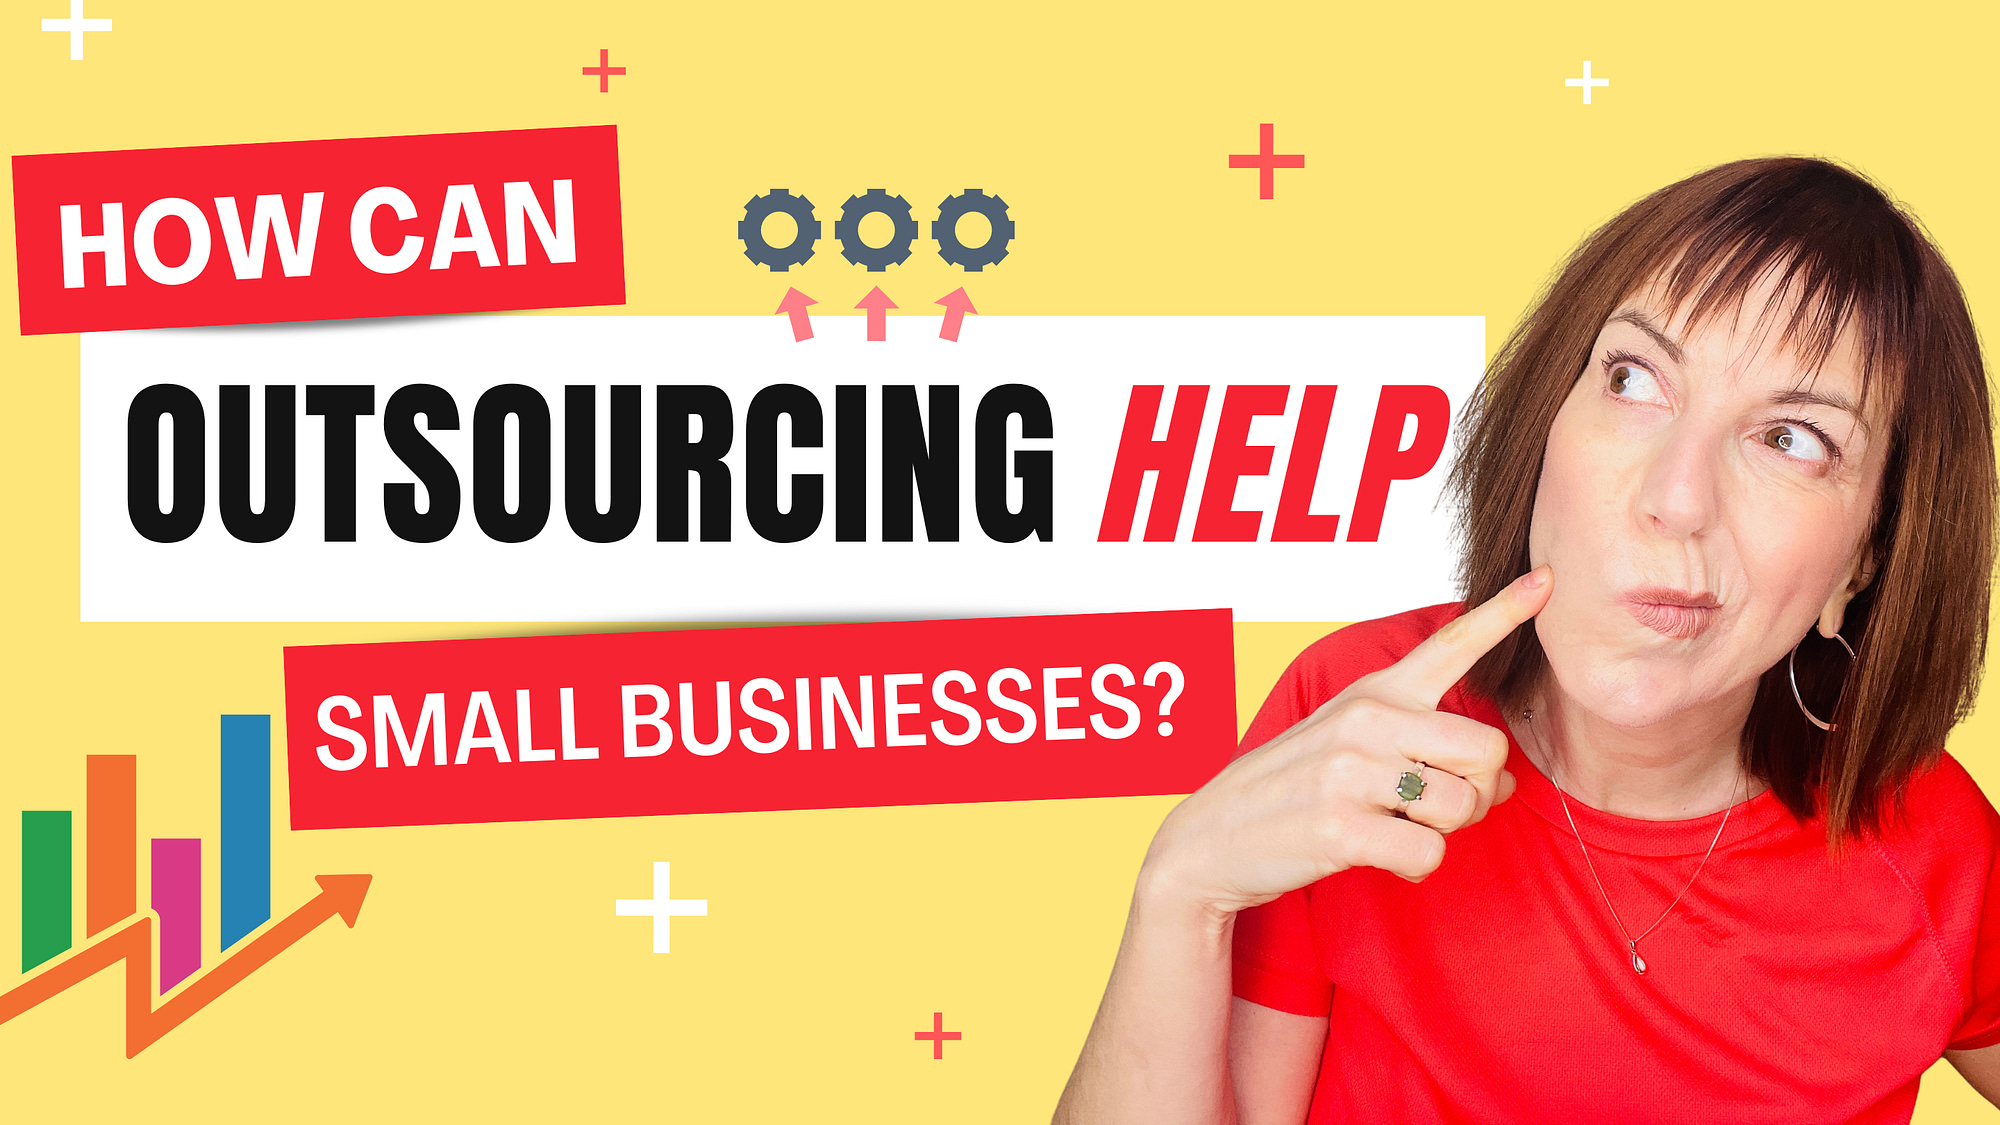 How Can Outsourcing Help Small Businesses